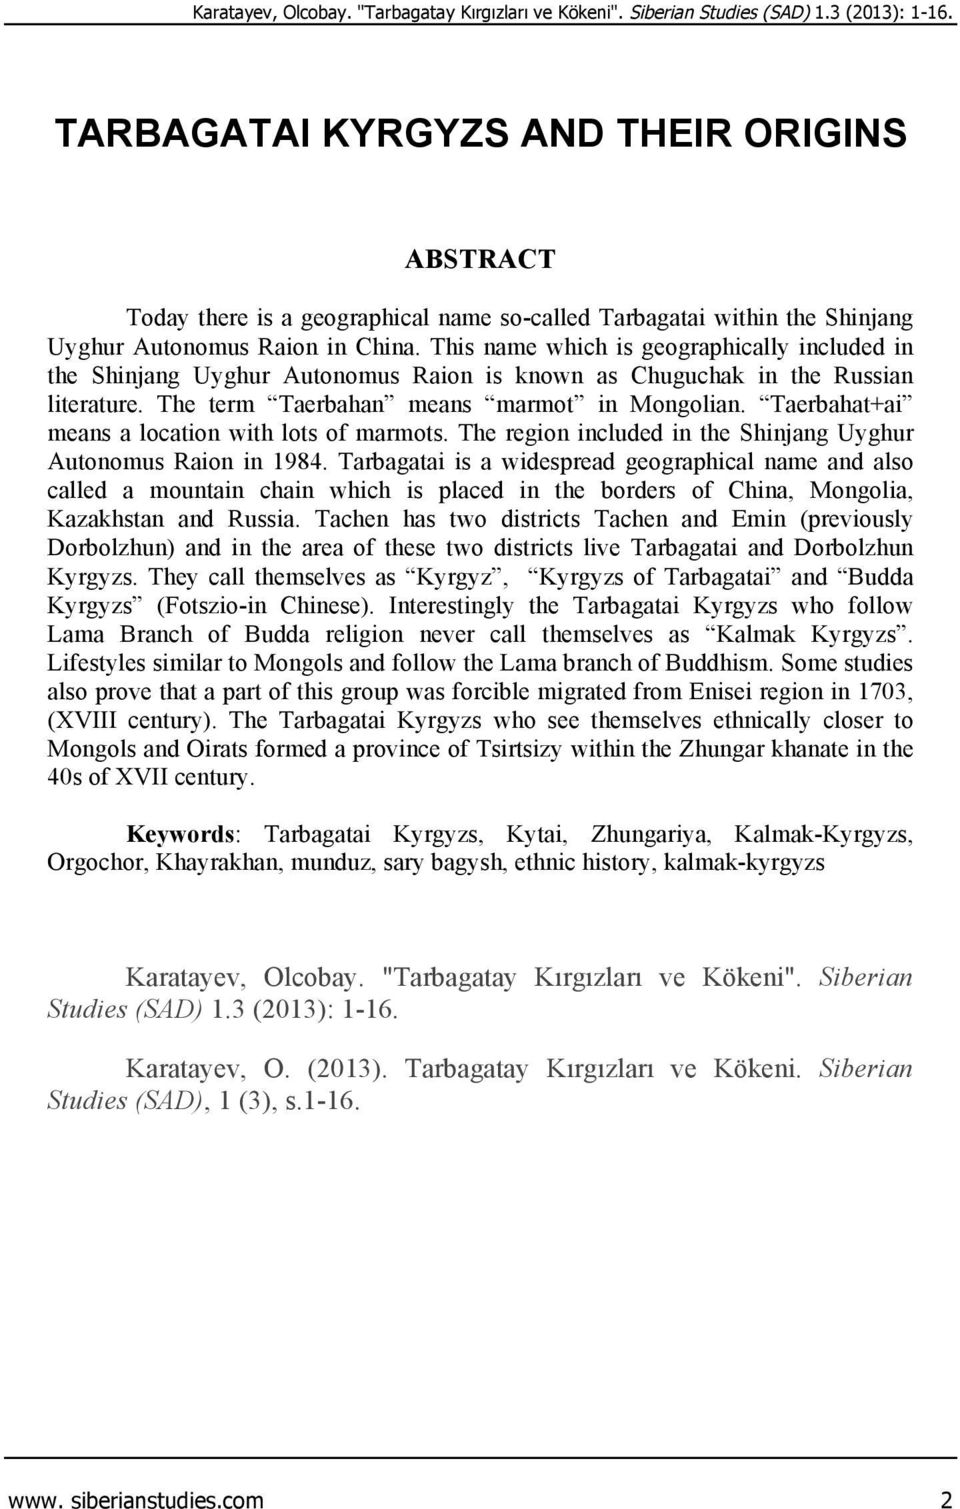 This name which is geographically included in the Shinjang Uyghur Autonomus Raion is known as Chuguchak in the Russian literature. The term Taerbahan means marmot in Mongolian.